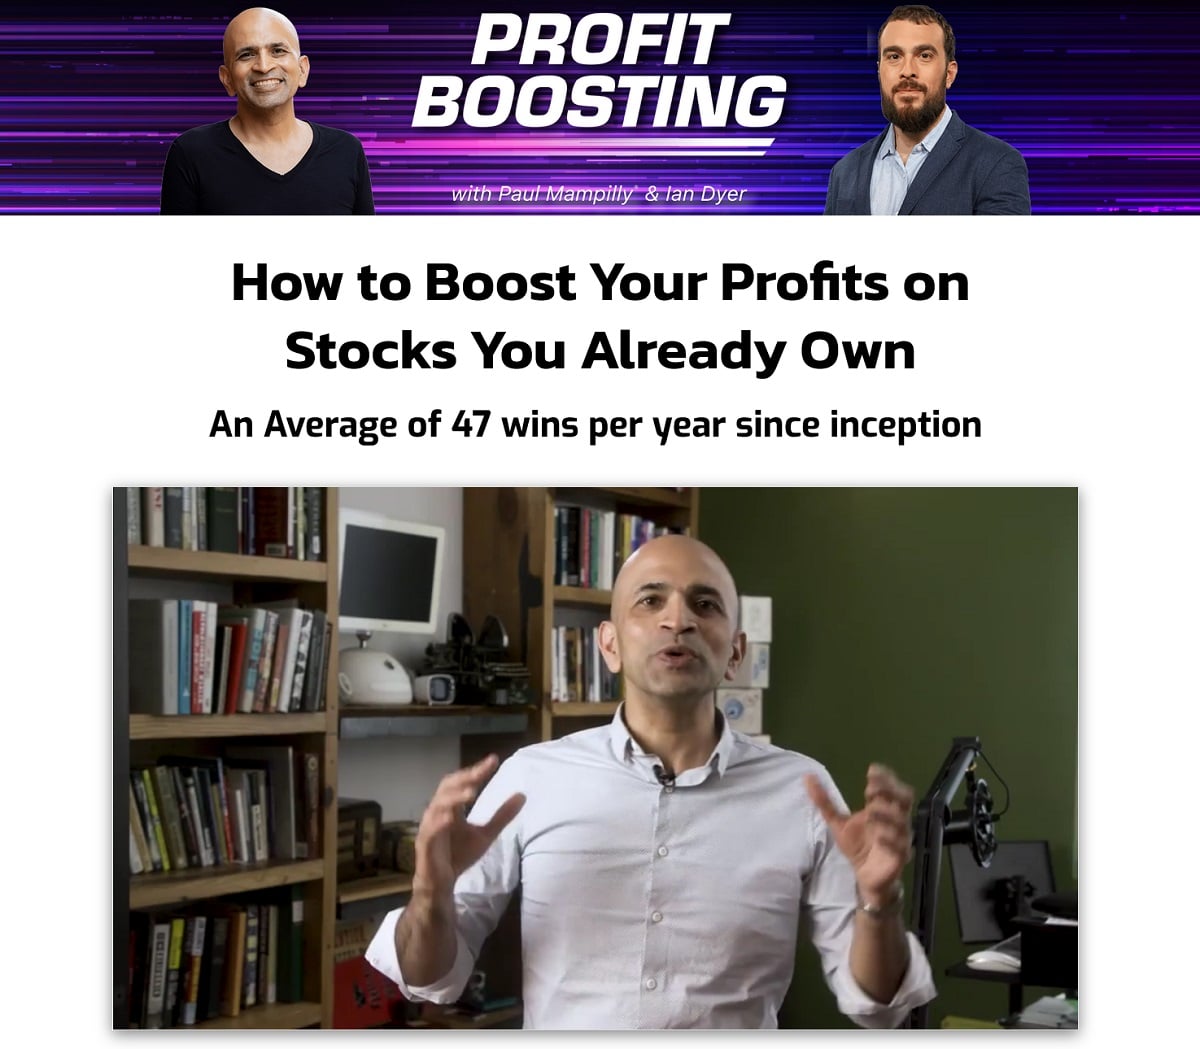 Profit Boosting with Paul Mampilly and Ian Dyer